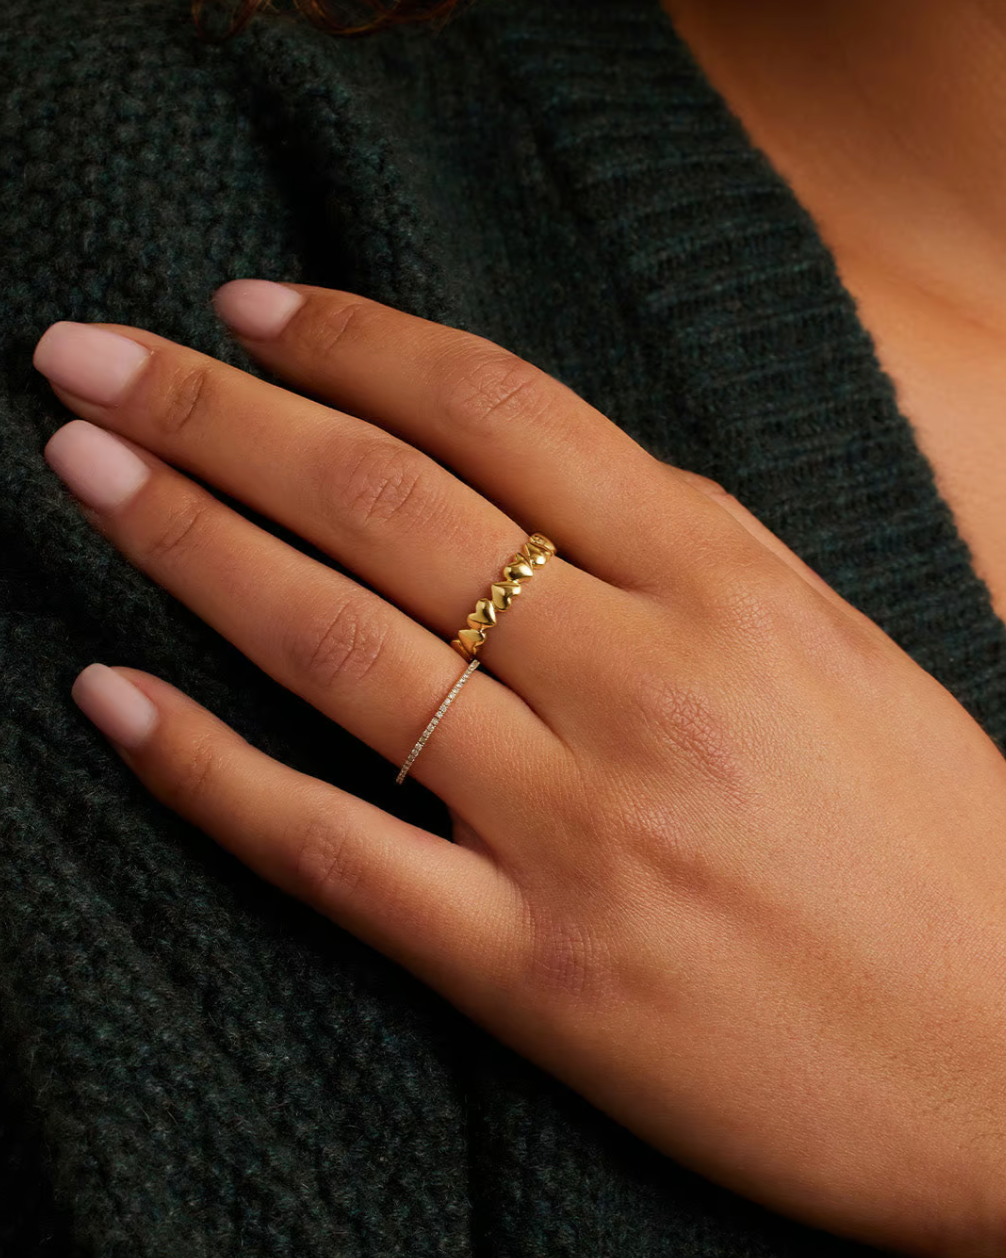 Lou heart ring - gold